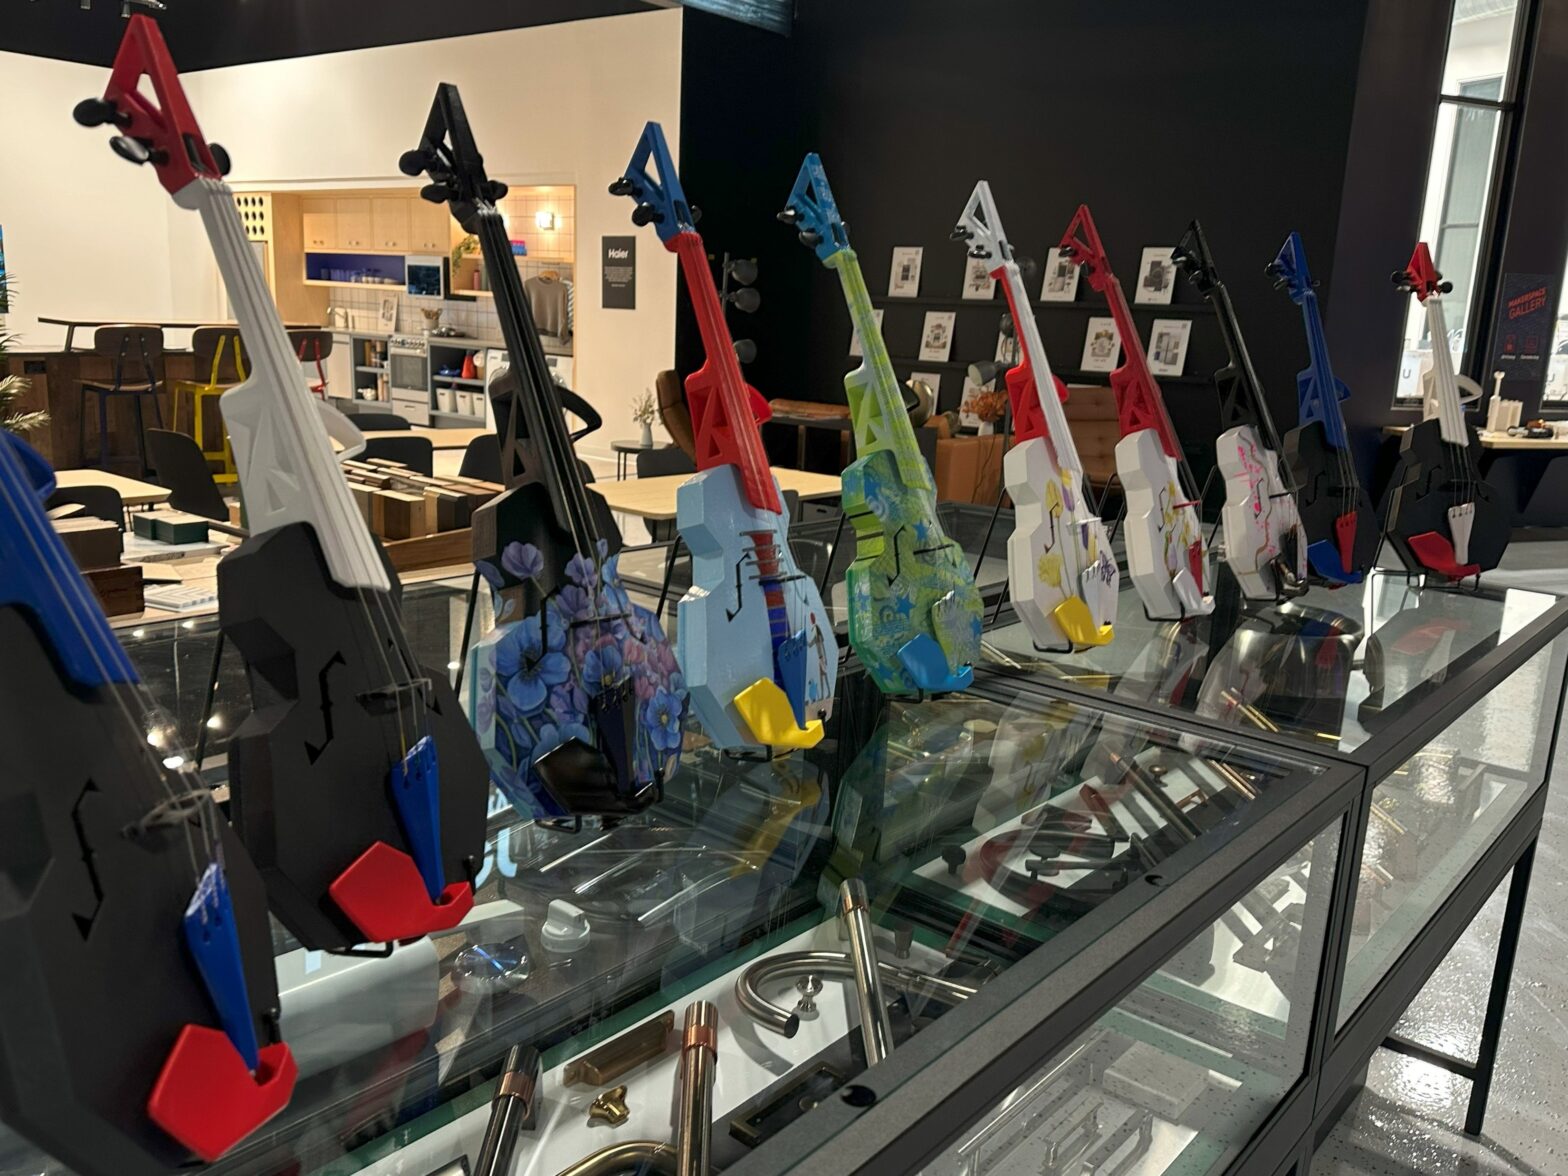 An image of 8 3D printed violins on a glass countertop in CoCreate.